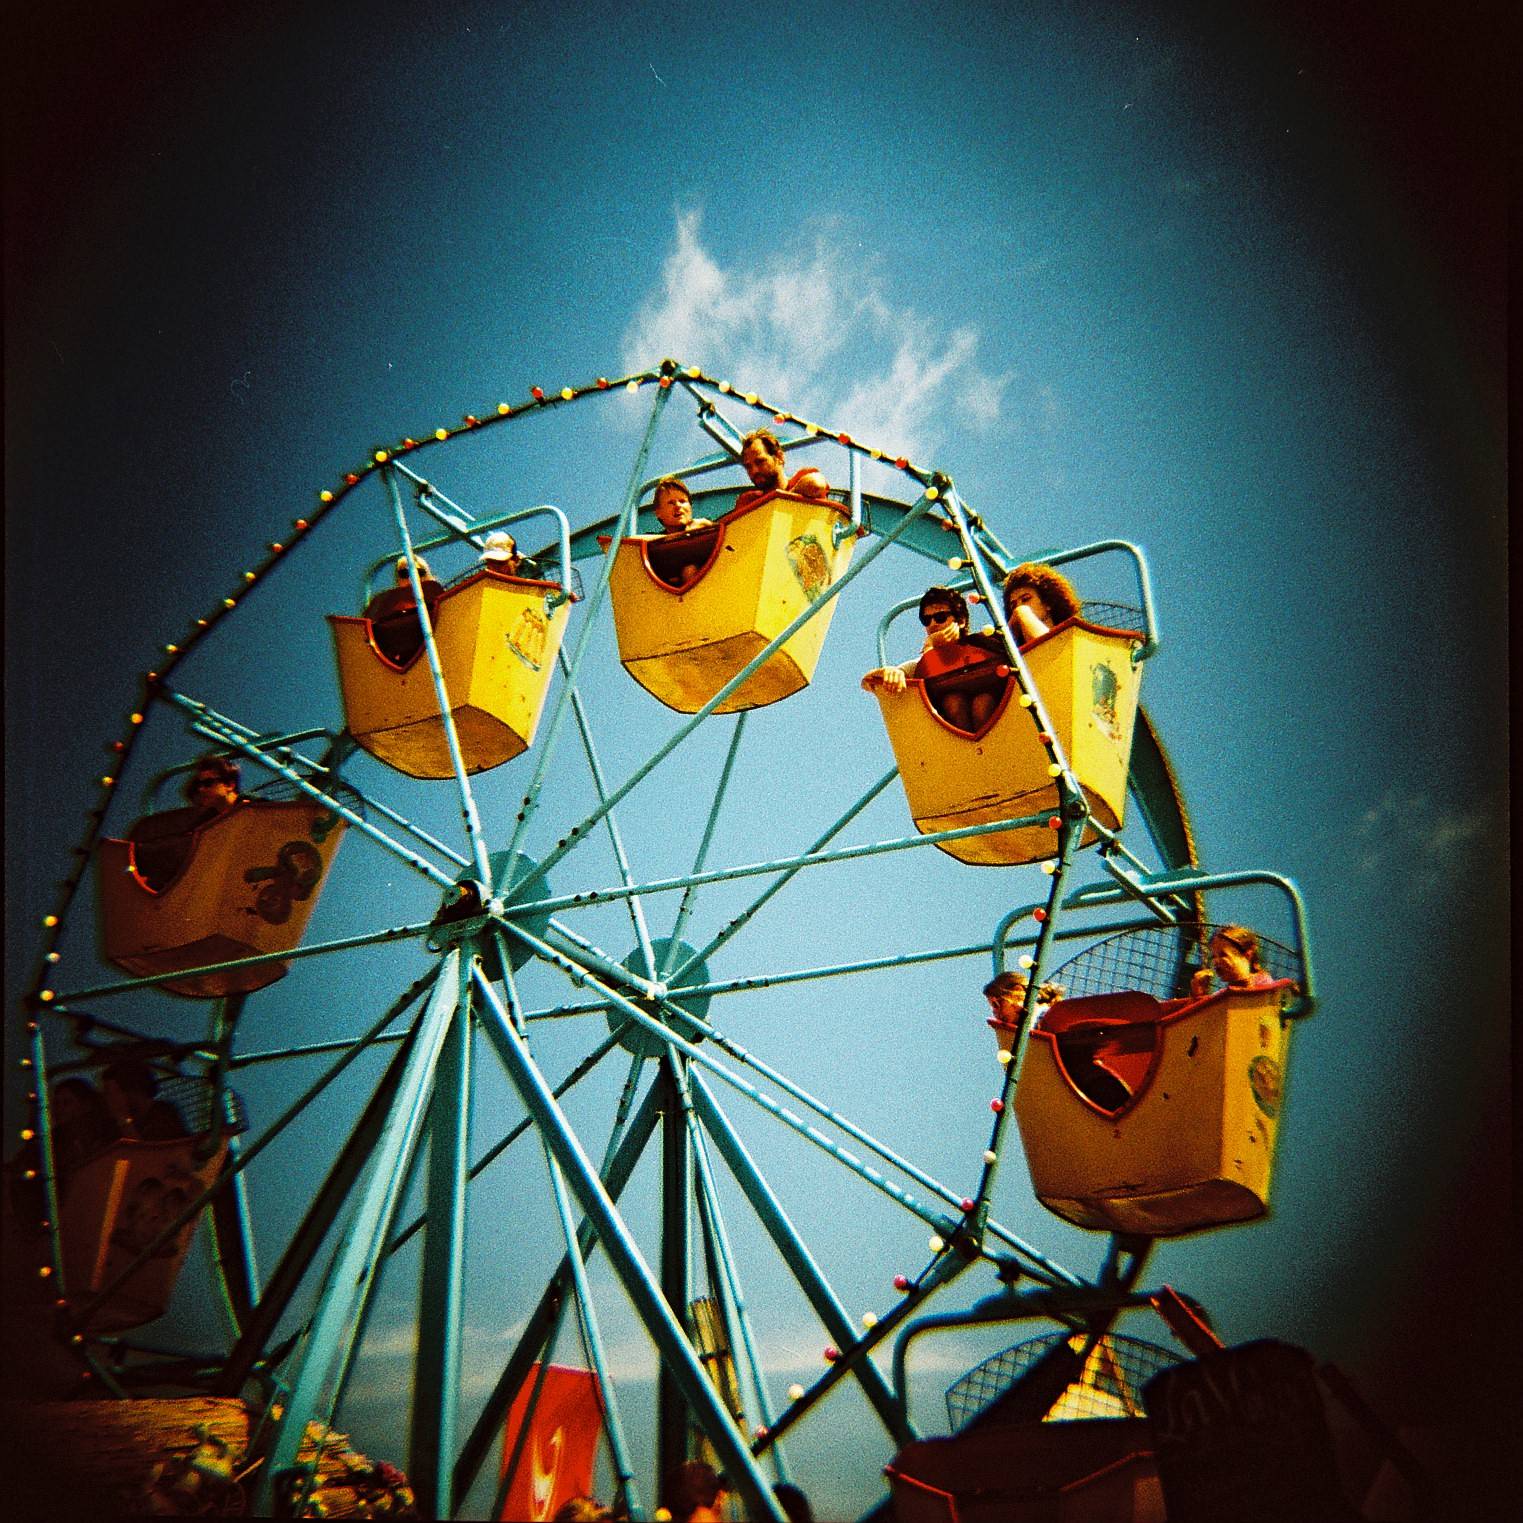 A Simple Tip to Enhance Your Diana F+ Vignettes · Lomography